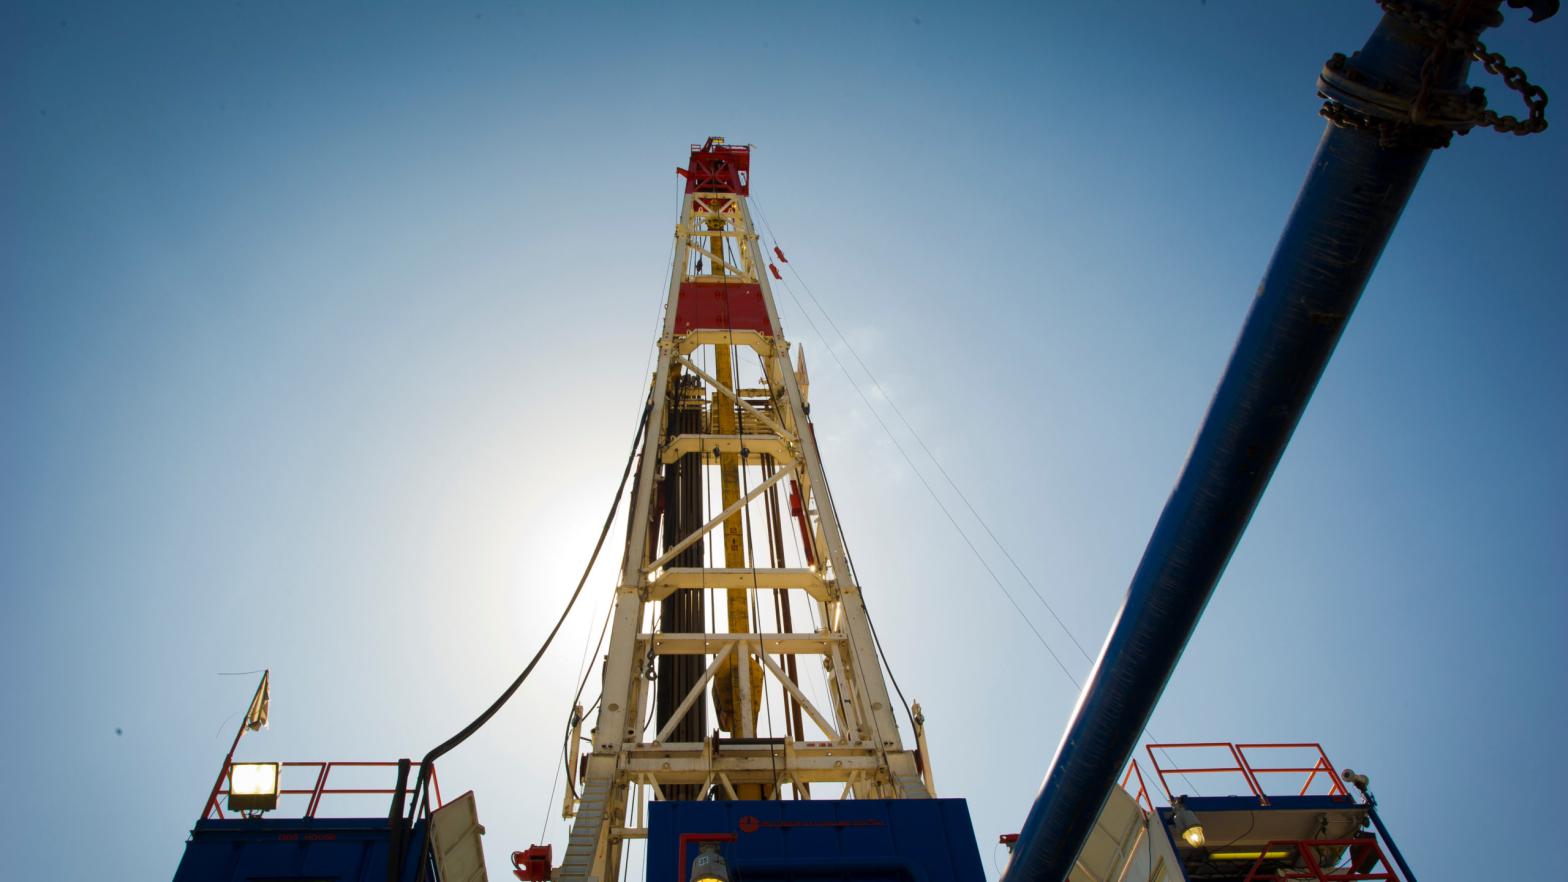 A fracking rig used for exploration in the Marcellus Shale fields outside the town of Waynesburg, Pennsylvania. (Photo: Mladen Antonov, Getty Images)